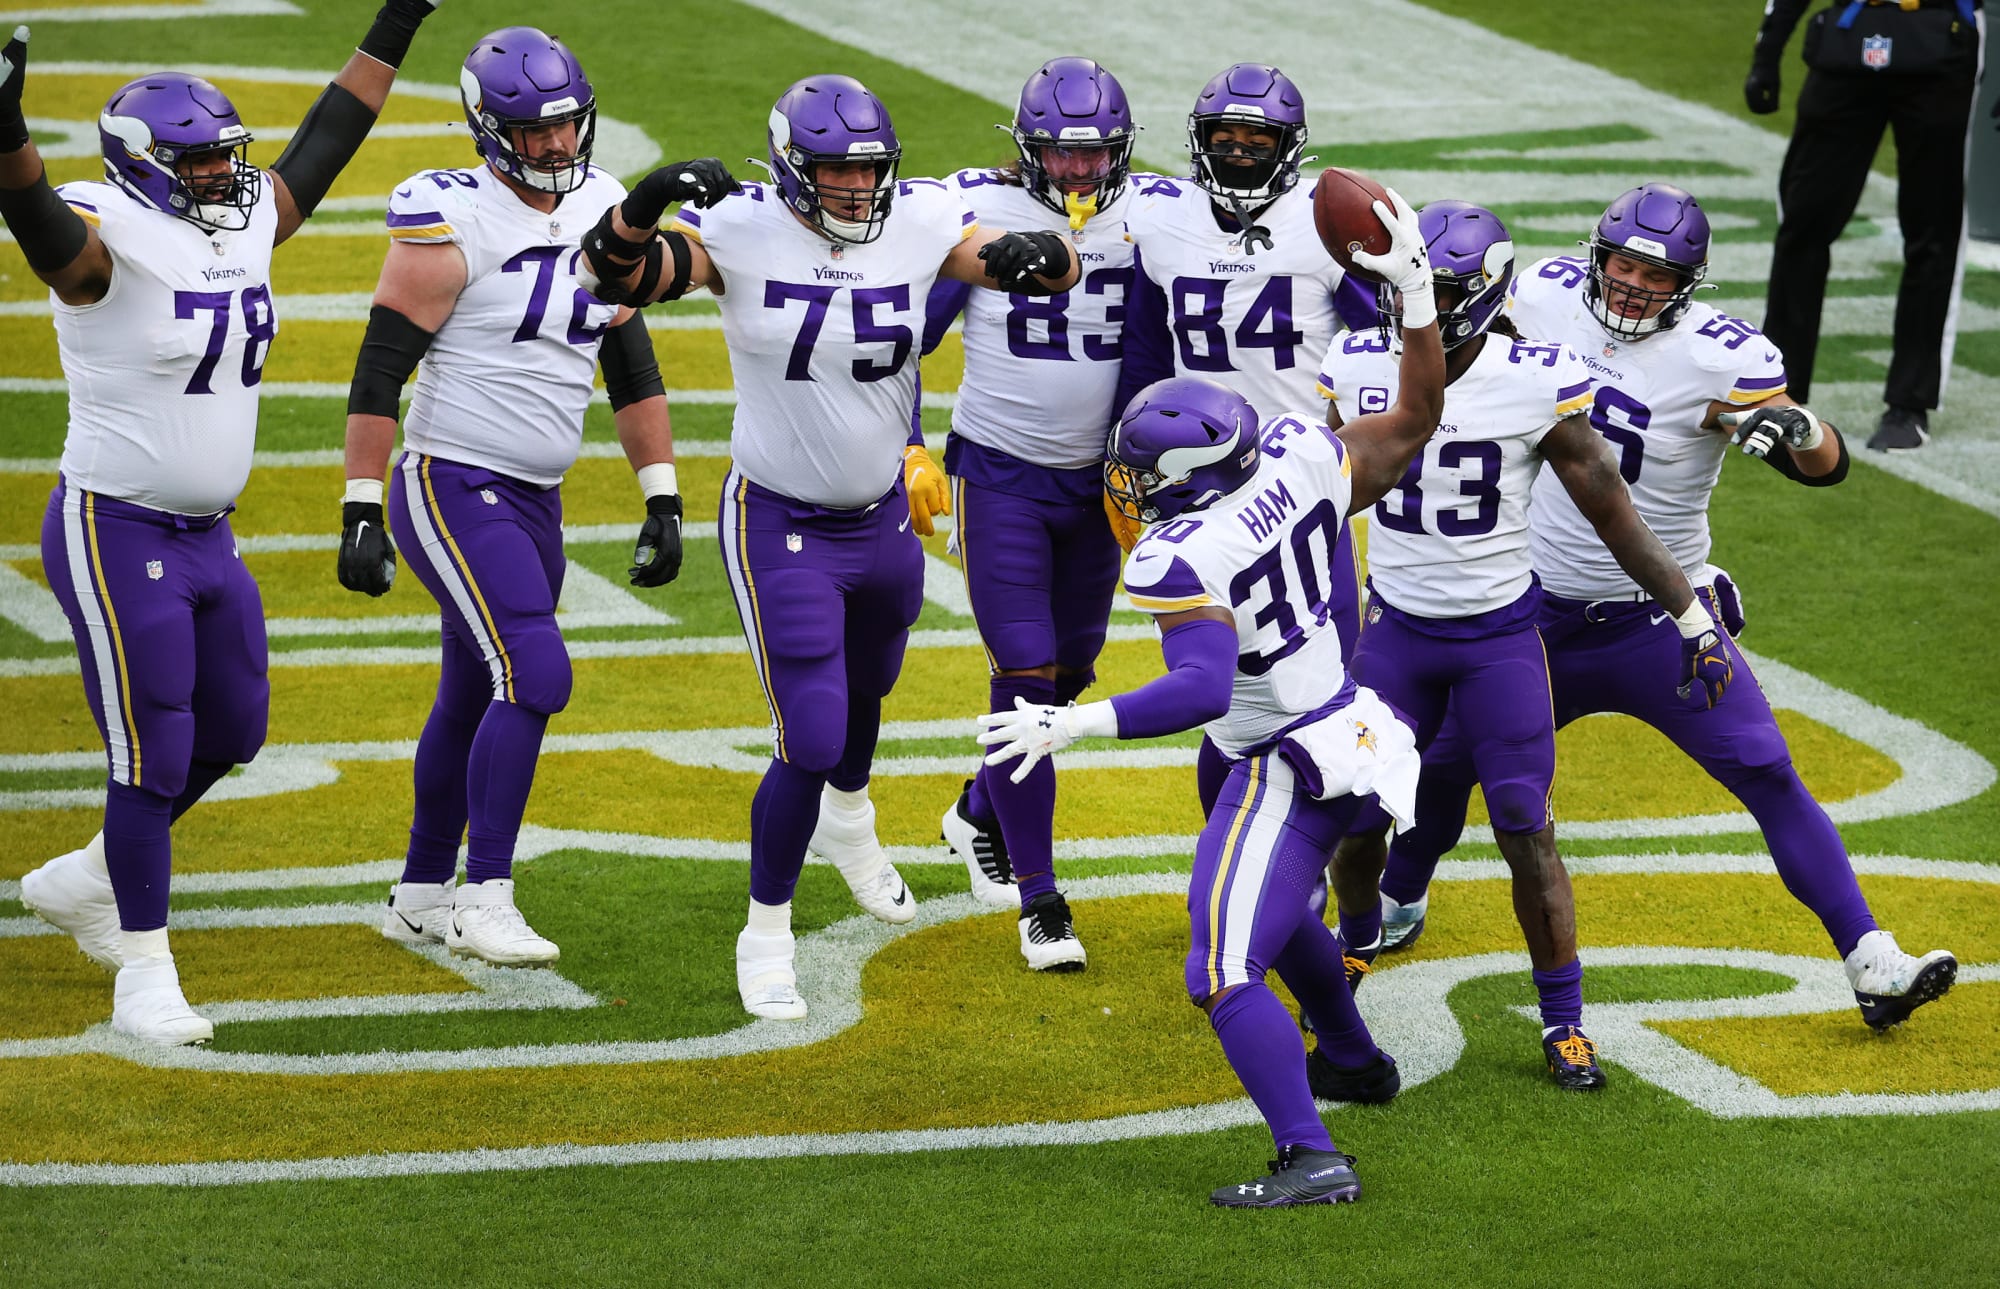 What are the Vikings playoff chances after beating the Packers?